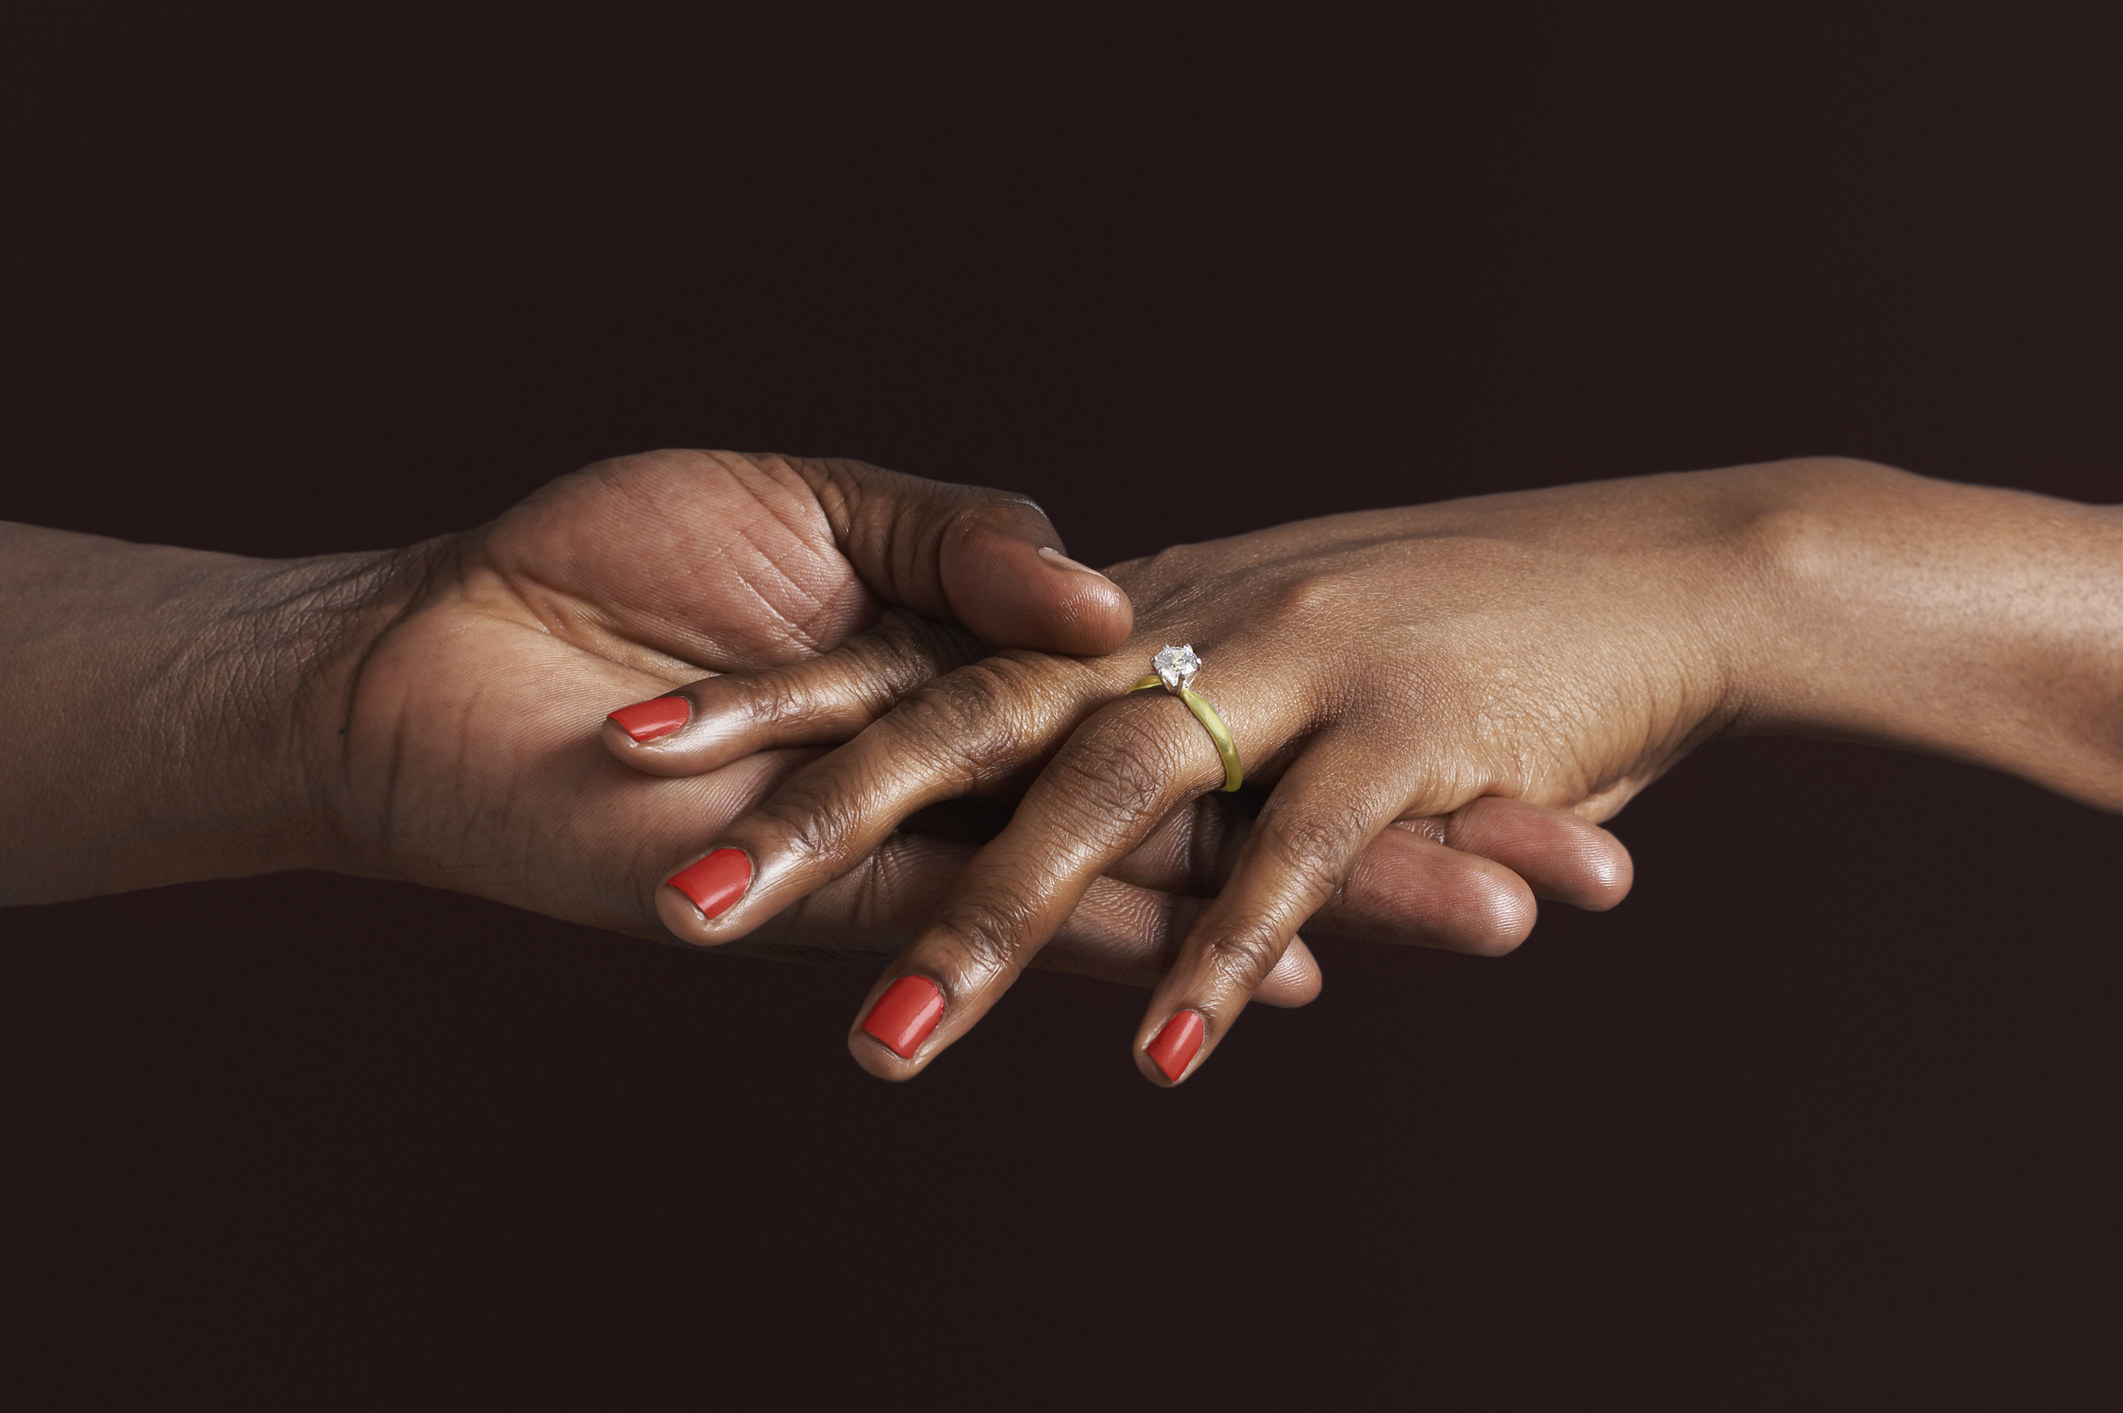 Two hands hold each other as one wears a wedding ring